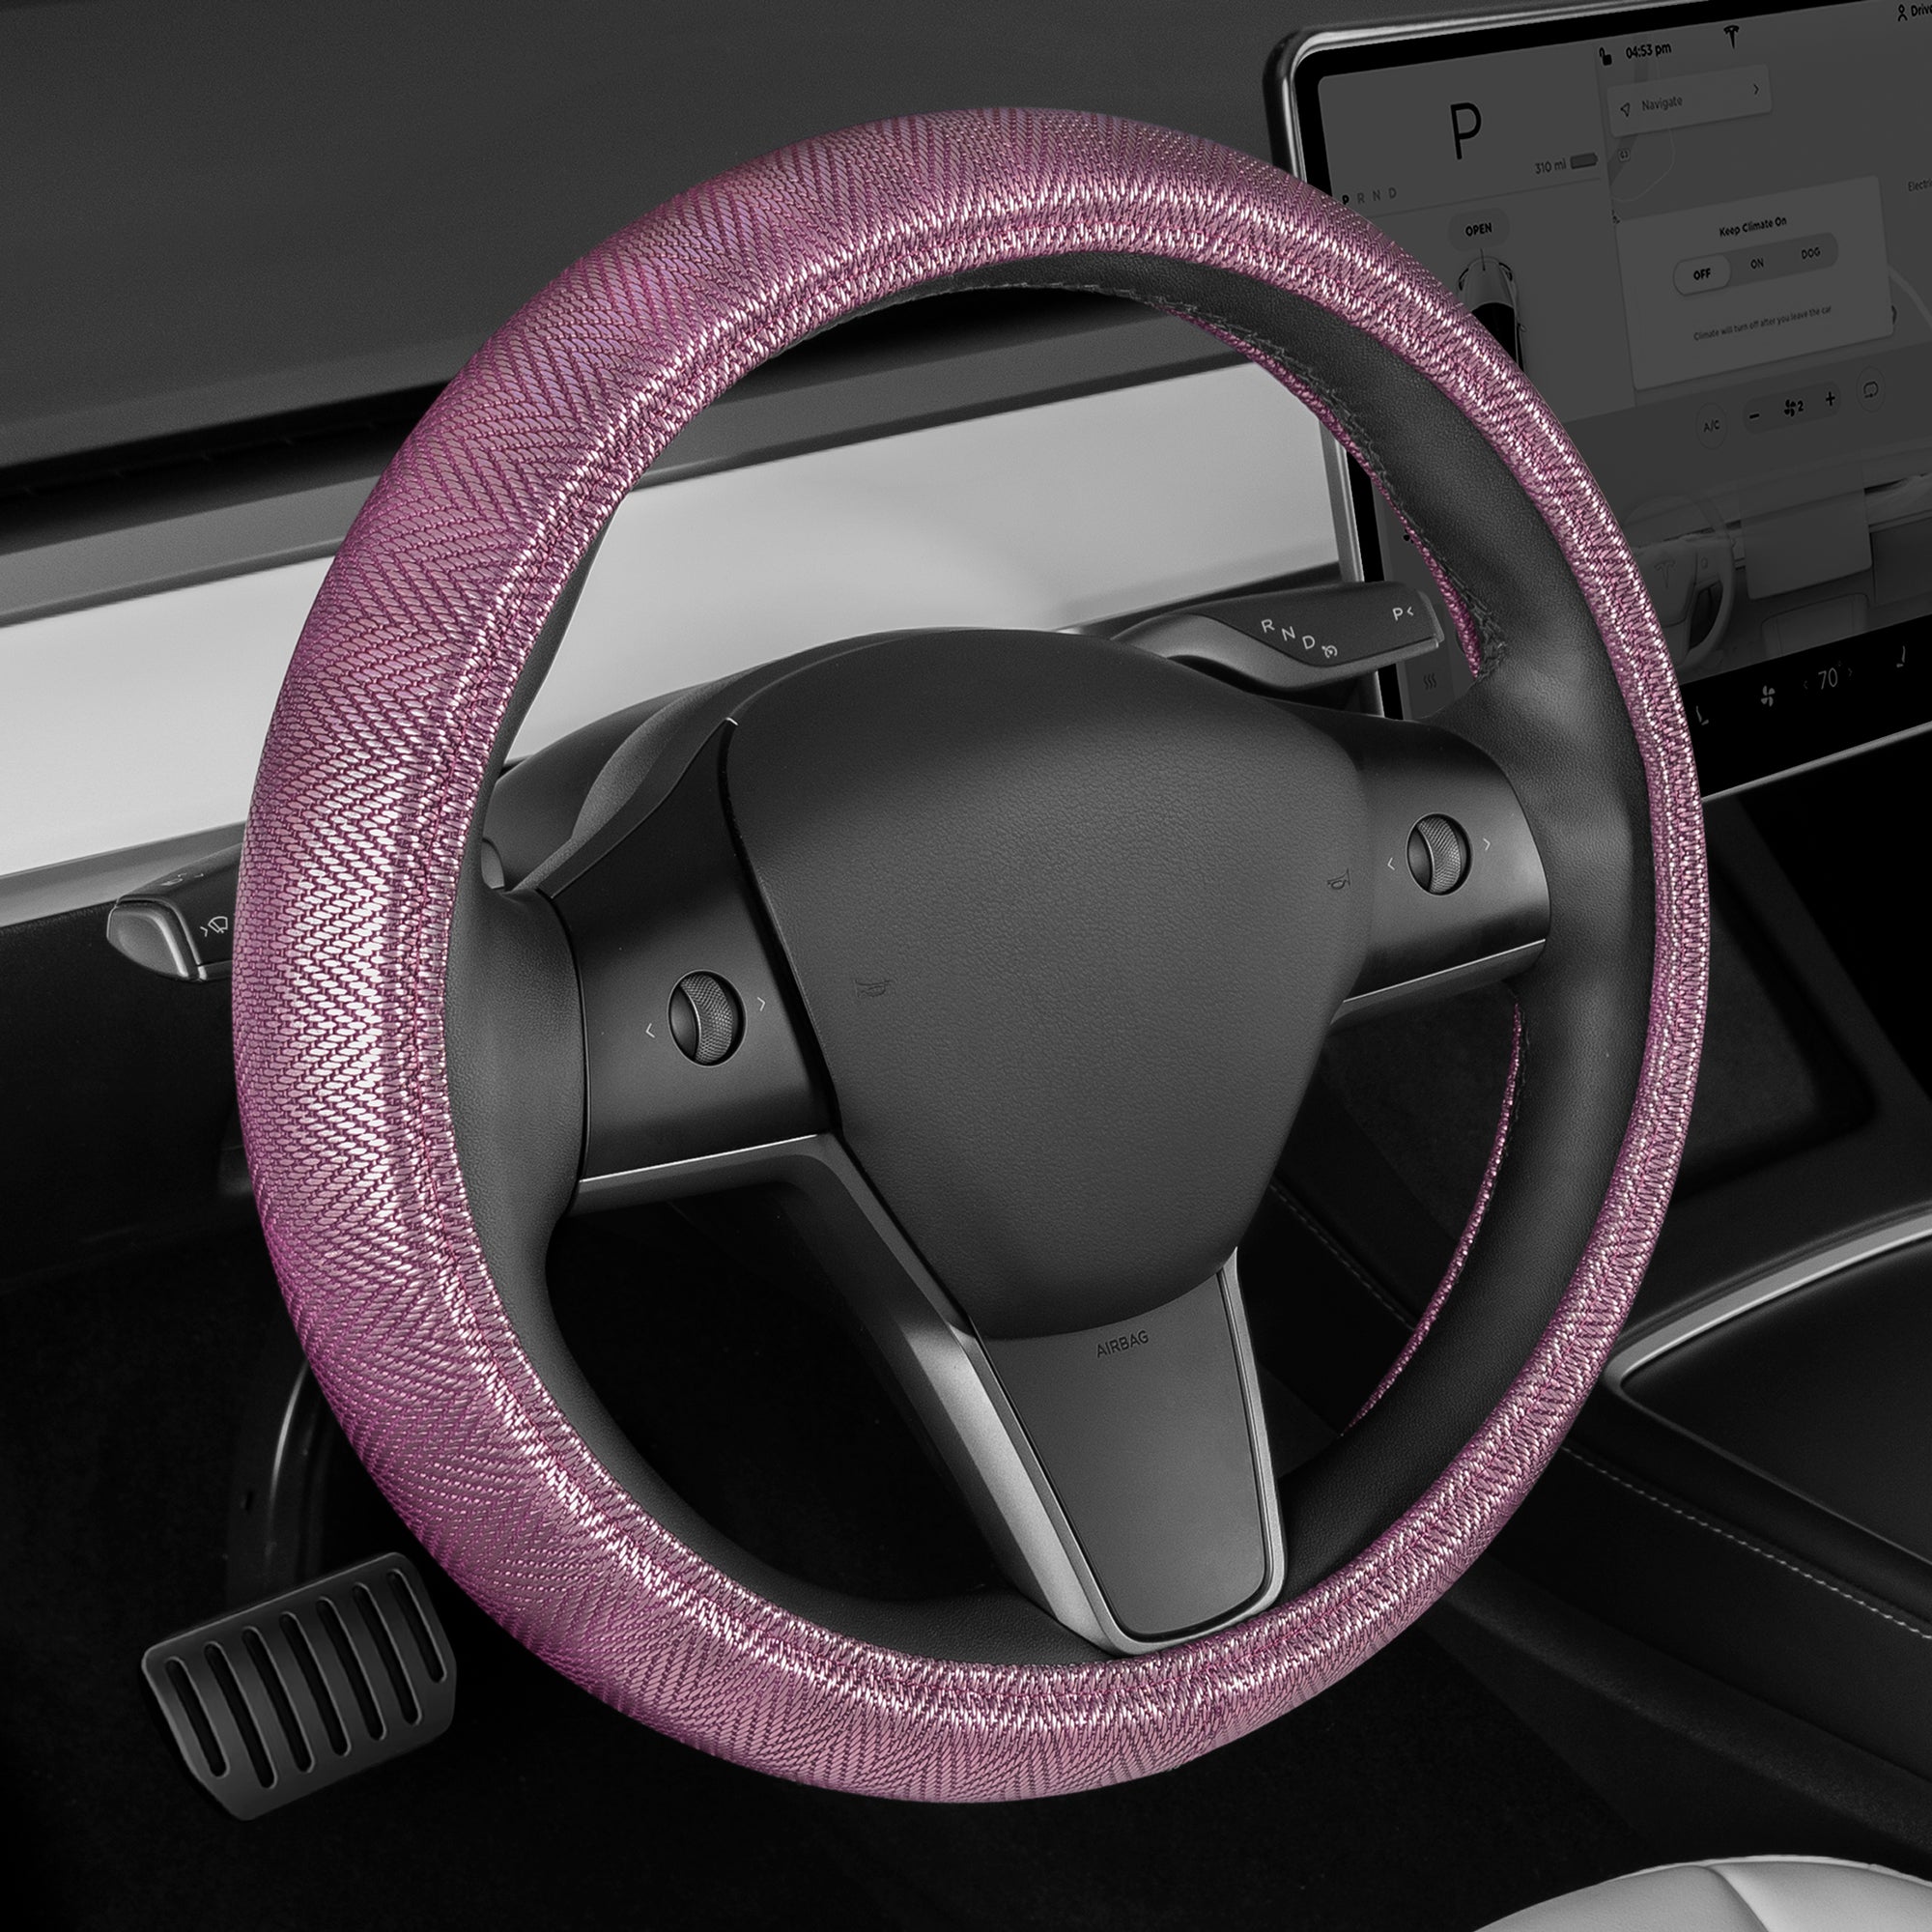 Carbella Purple Steering Wheel Cover, Standard 15 Inch Size Fits Most Vehicles, Cute Shiny Bling Car Steering Wheel Cover with Herringbone Detail, Car Accessories for Women